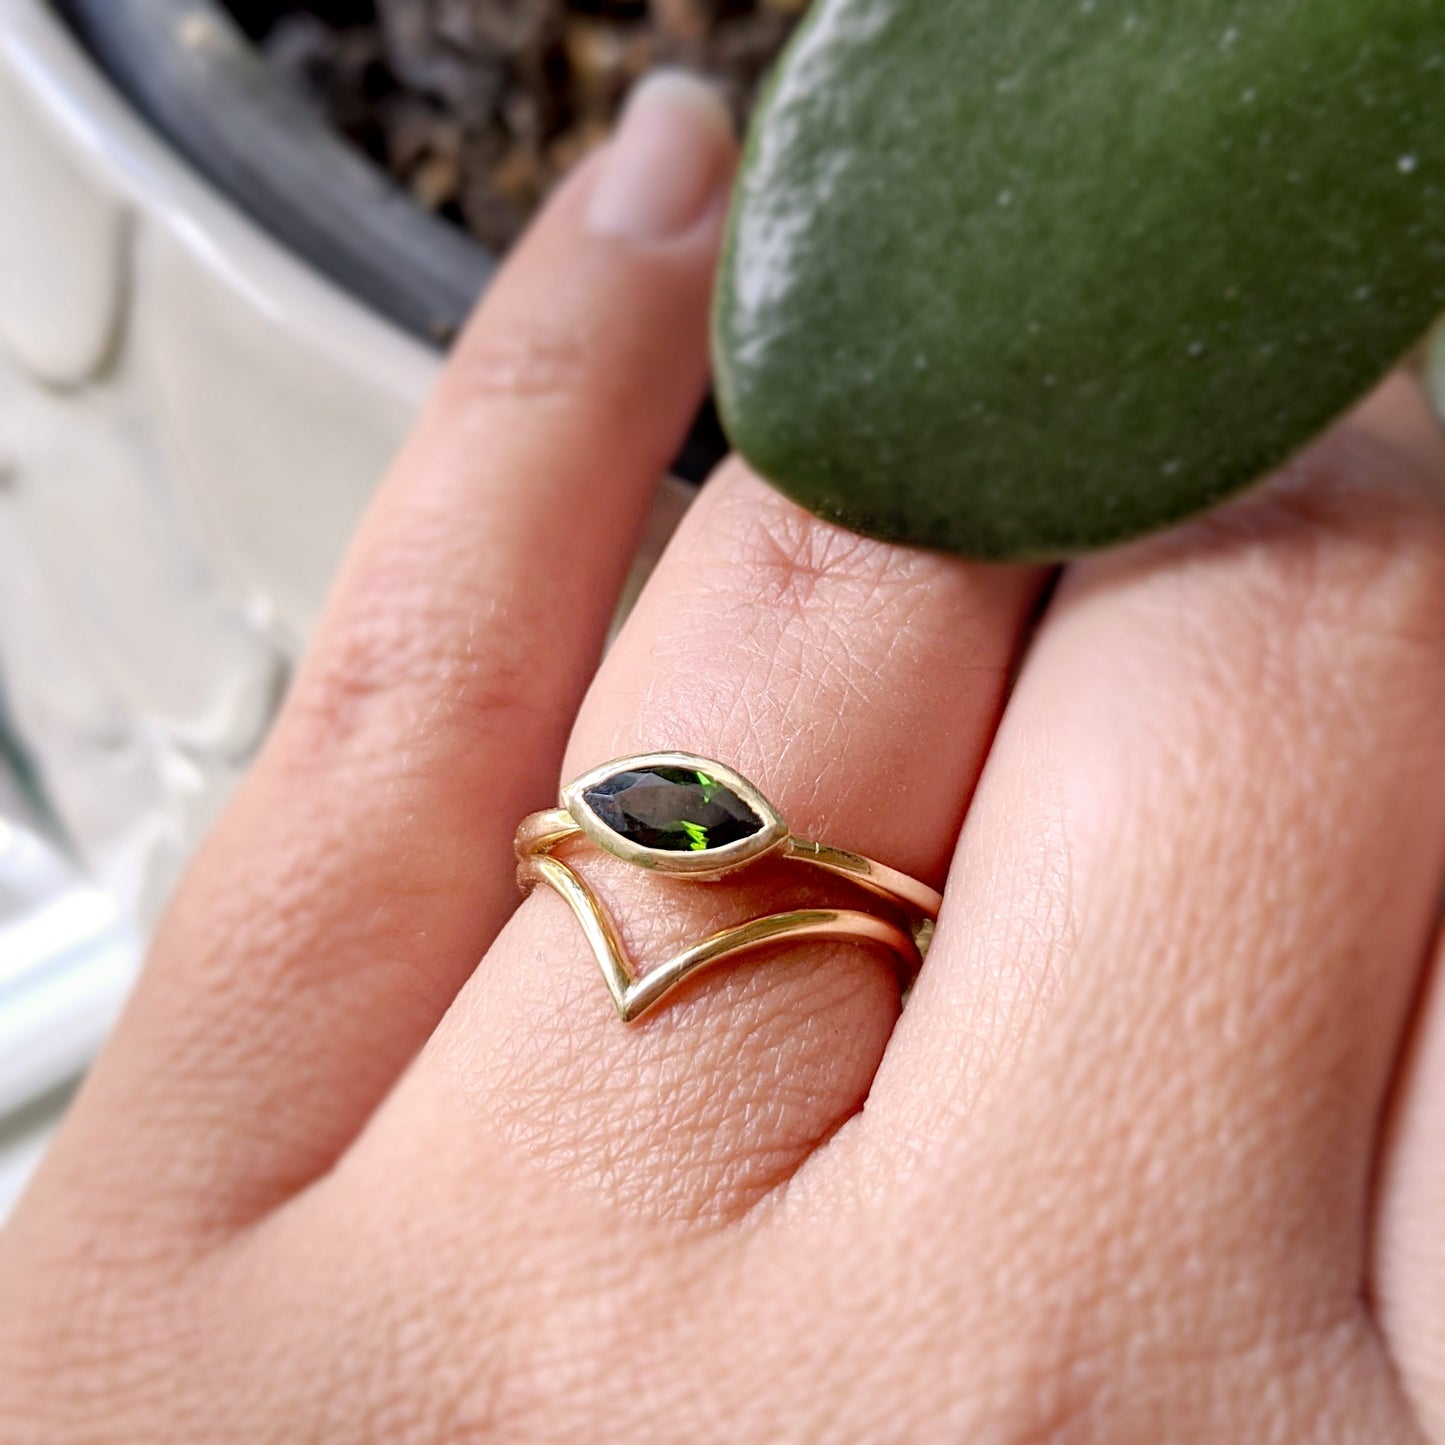 Full view of Olive Ring on woman's hand to help give an idea of its scale.